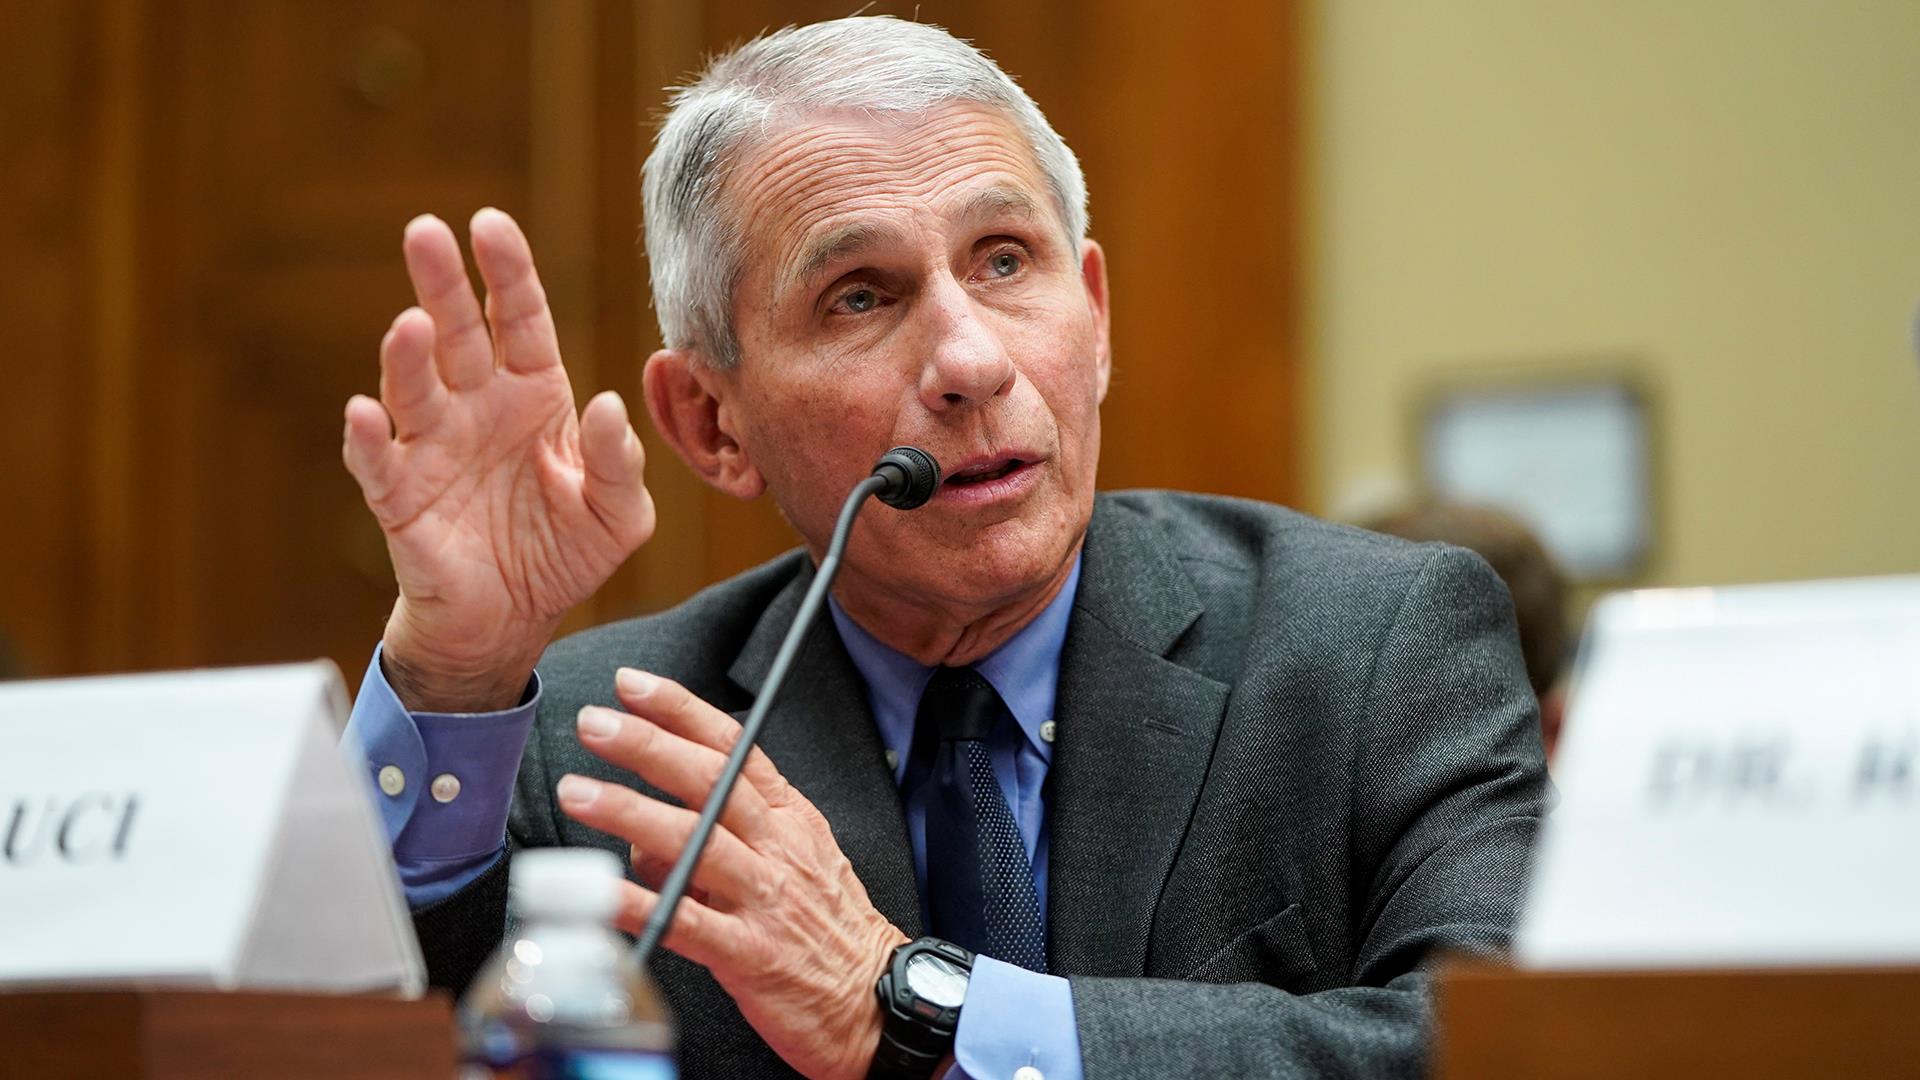 Dr. Anthony Fauci: Anti-Pandemic Hero And Lifelong Timex Watch Guy